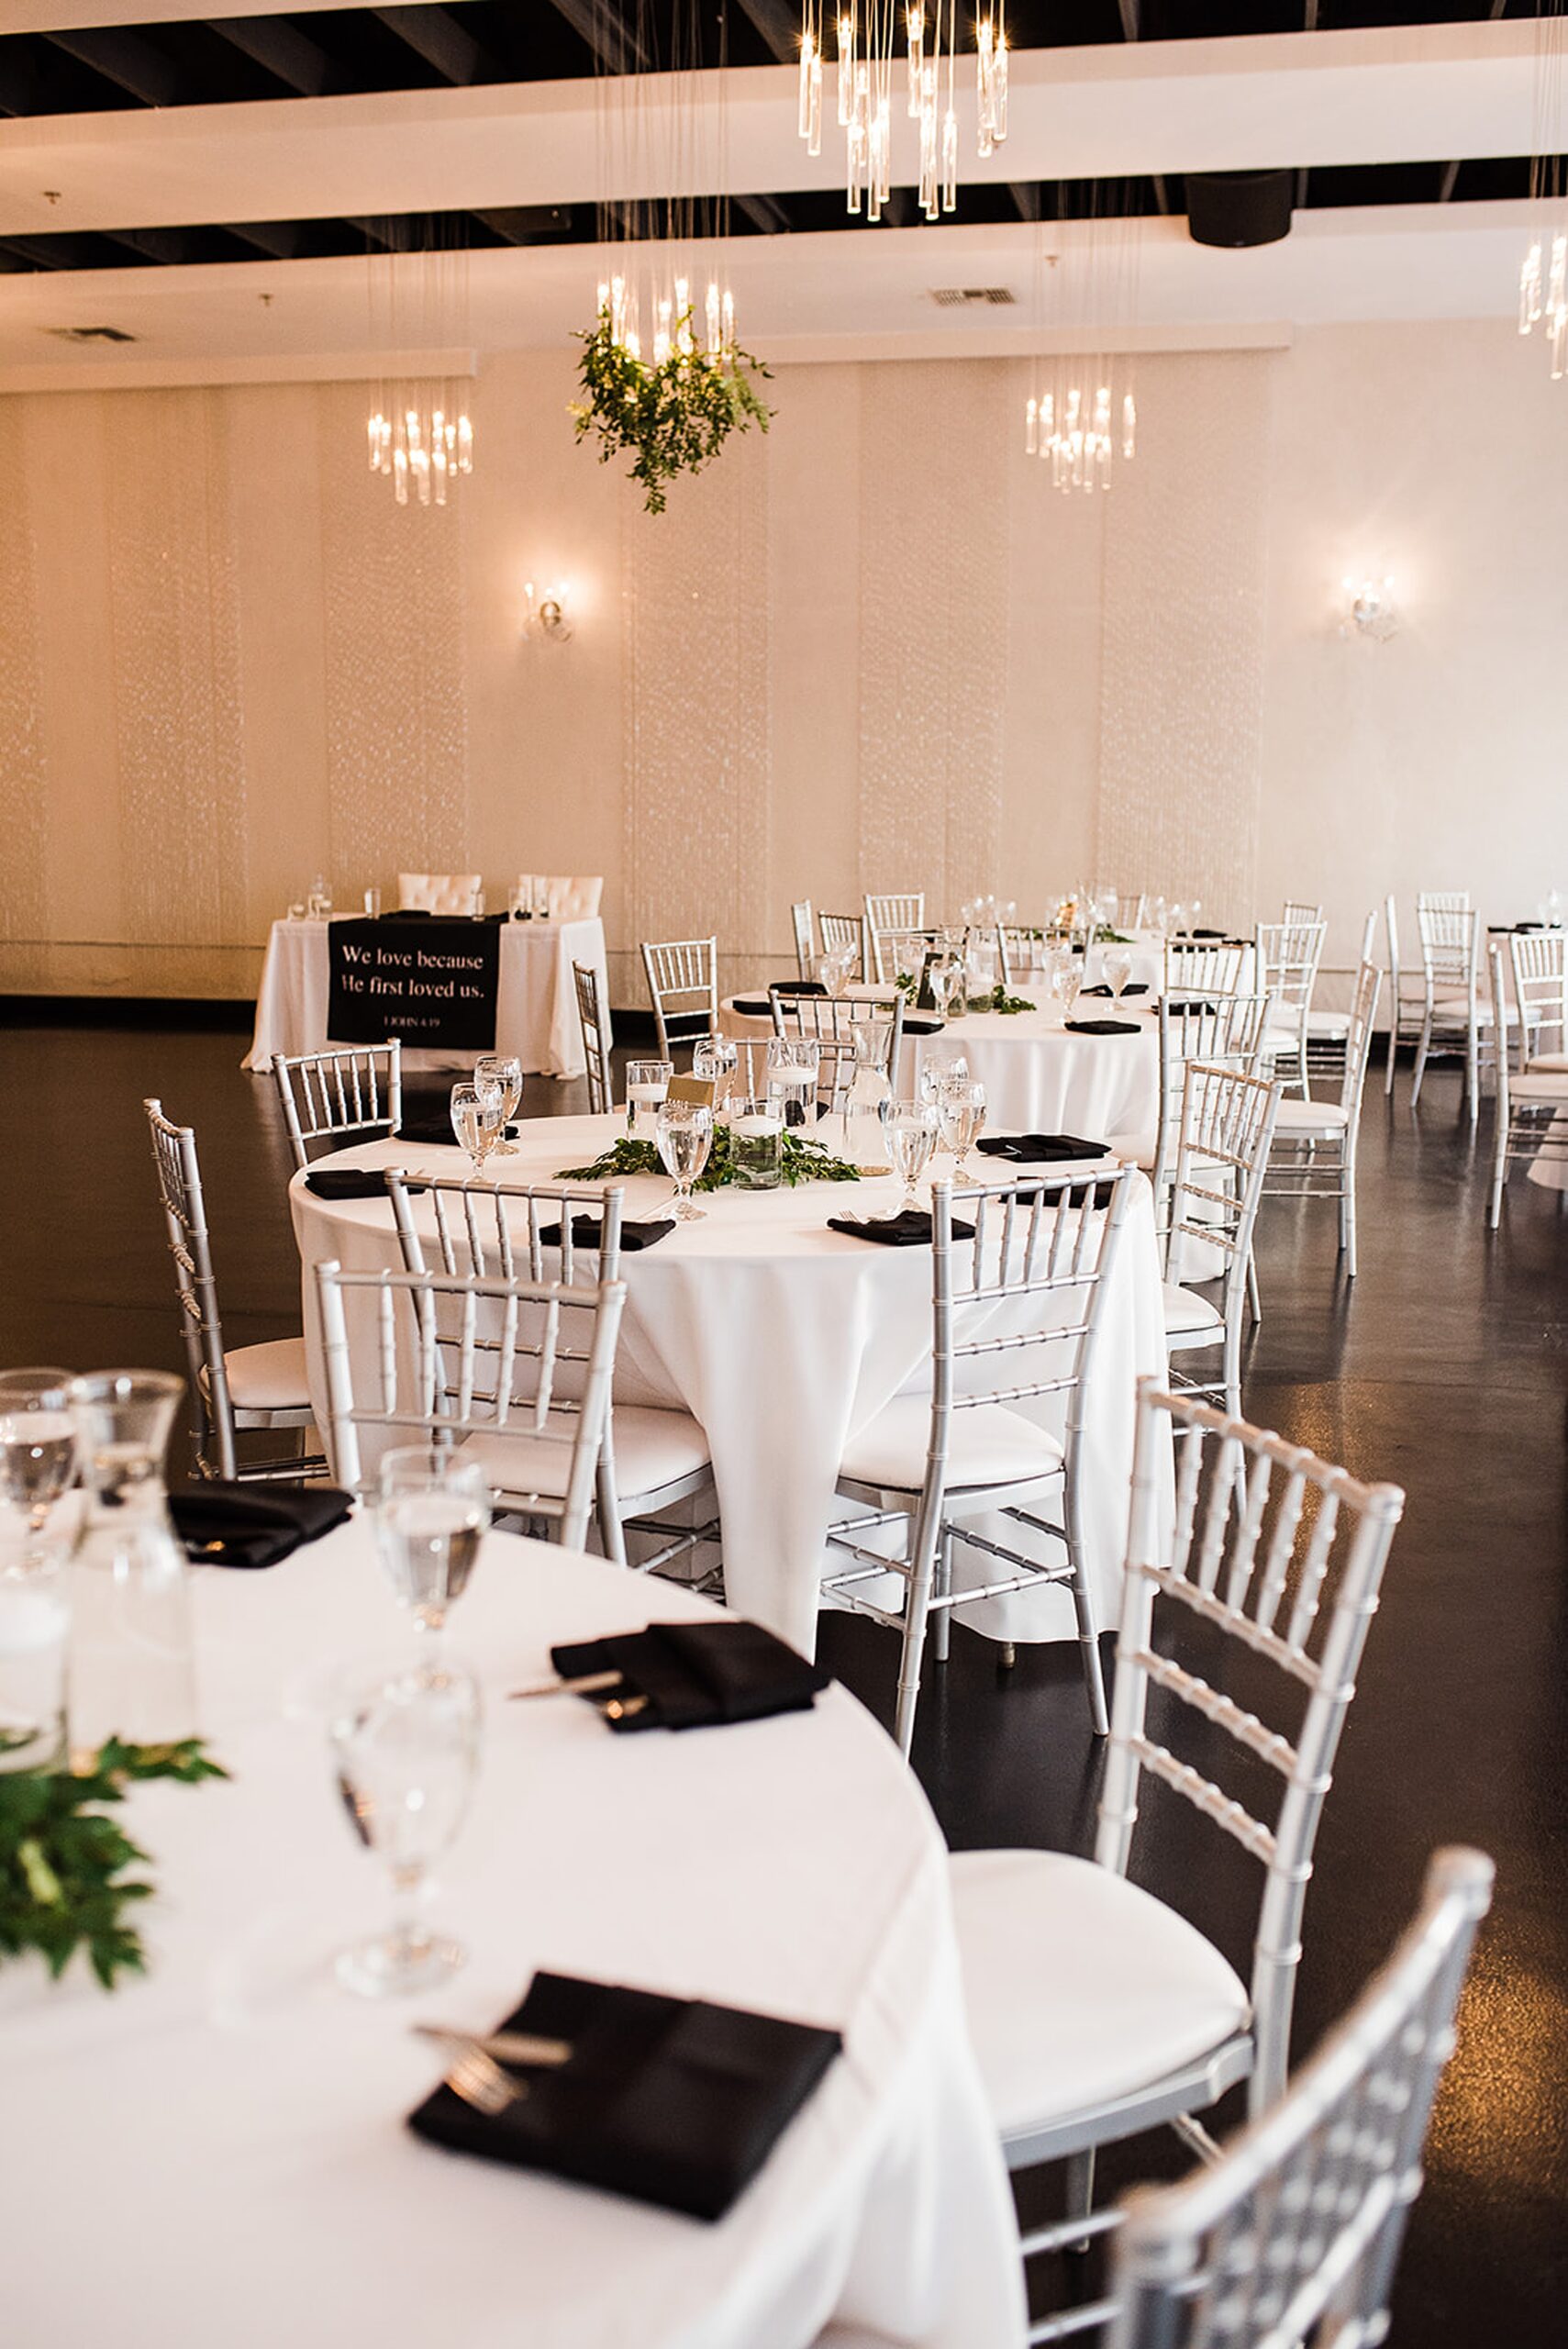 Details of a reception set up with white and black linens